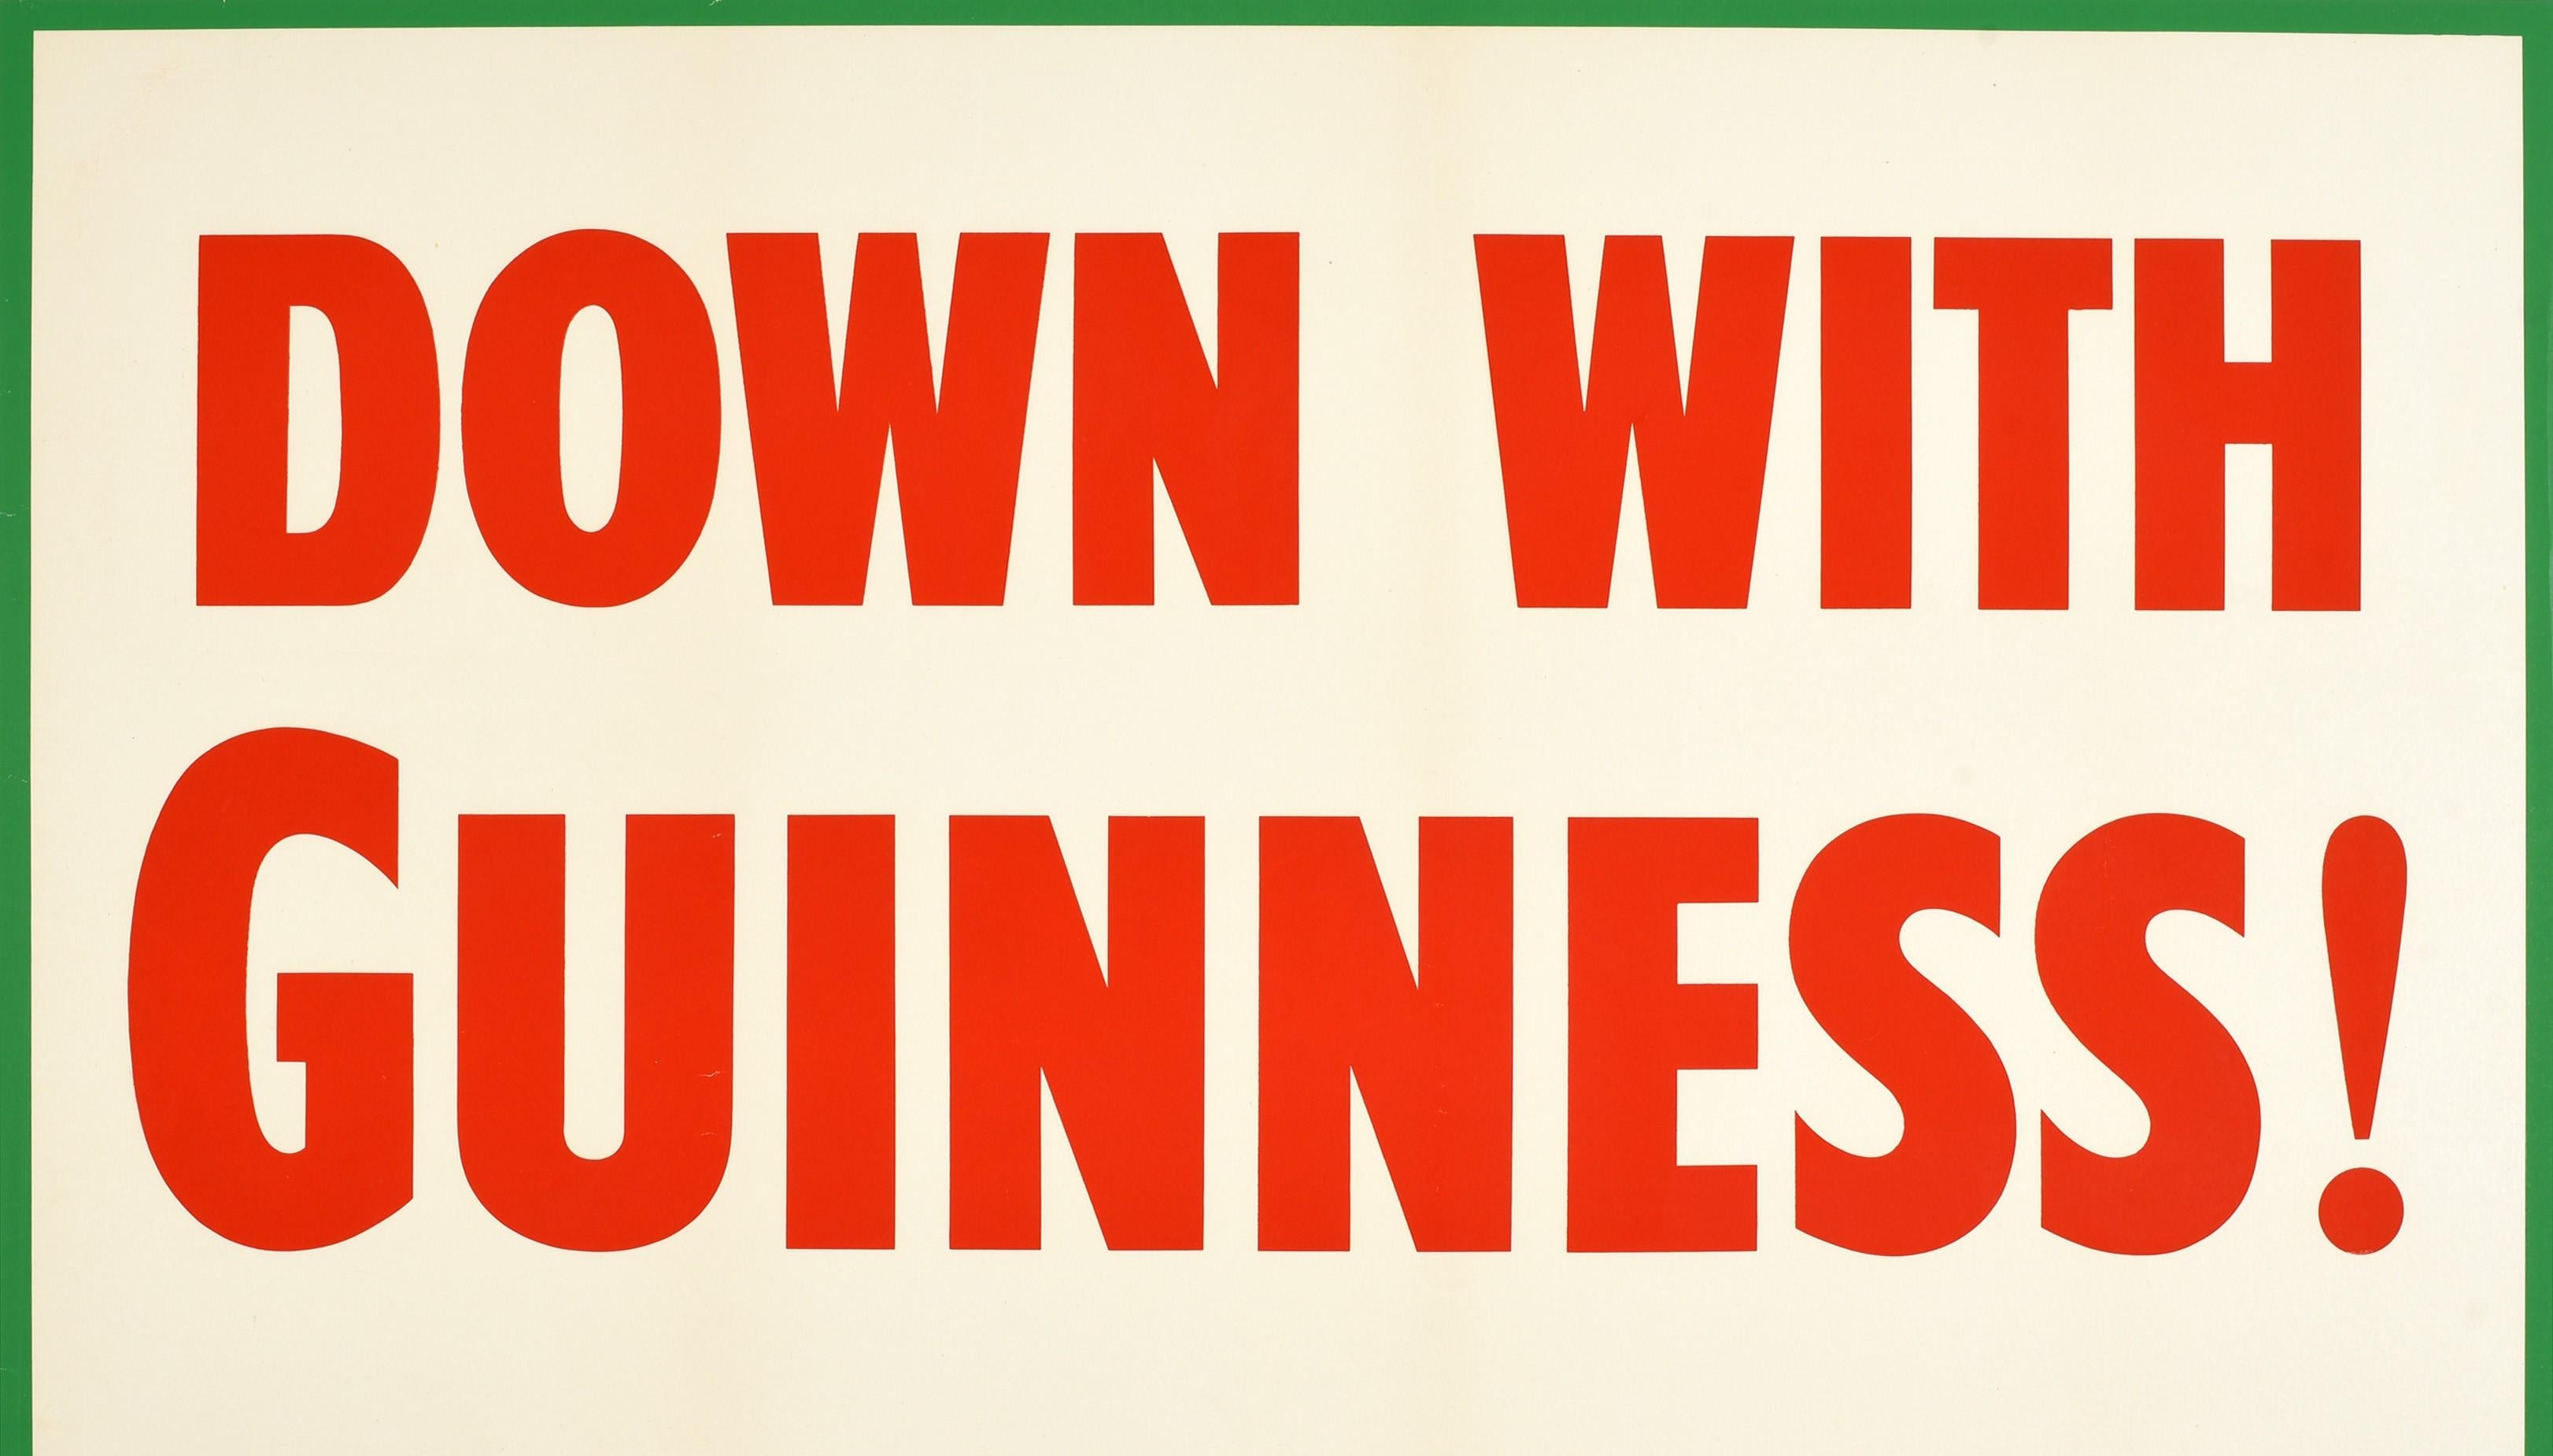 Original vintage drink advertising poster featuring text in bold red and black letters framed by a green line border: Down With Guinness! - then you'll feel better. One of the world's most popular beer drink brands, Guinness is an Irish dry stout